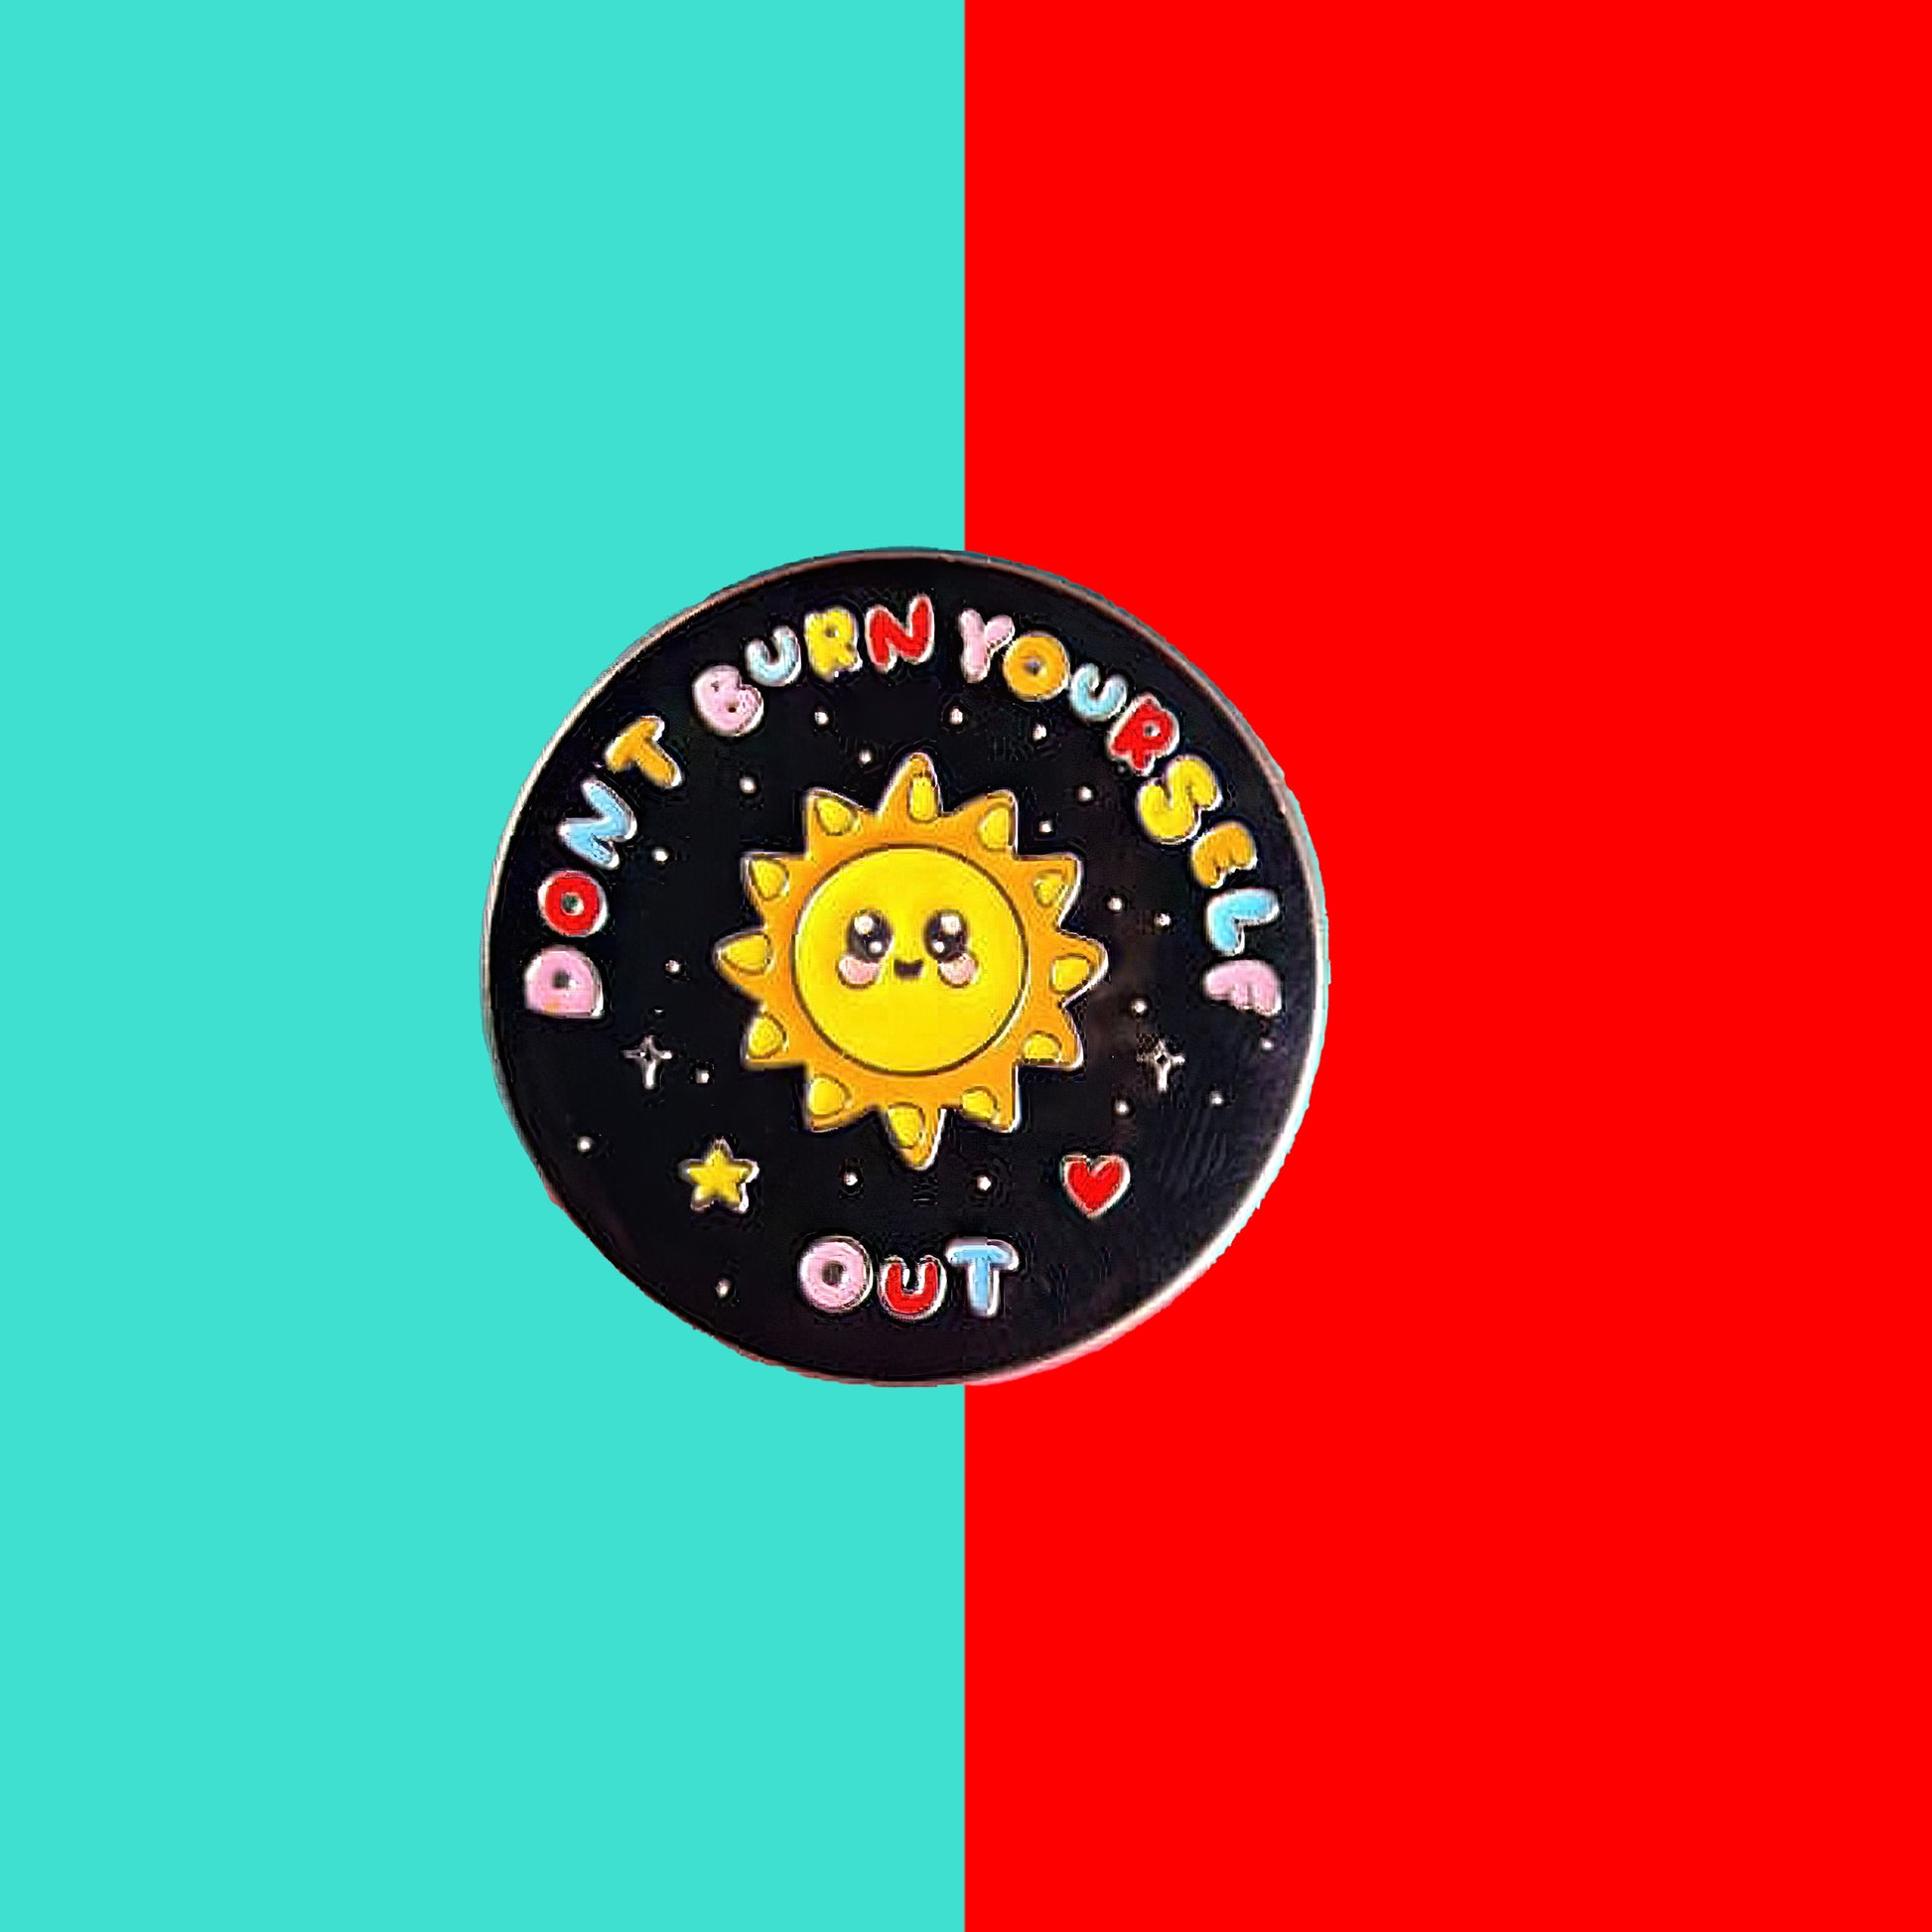 The Don't Burn Yourself Out Sunshine Enamel Pin on a blue and red background. The circle shaped pin badge is a black base with a yellow smiling sunshine in the centre with rainbow text surrounding it reading 'don't burn yourself out' along with a red heart, yellow star and silver sparkles. The design was created as a gentle reminder to take care of yourself and self care. 